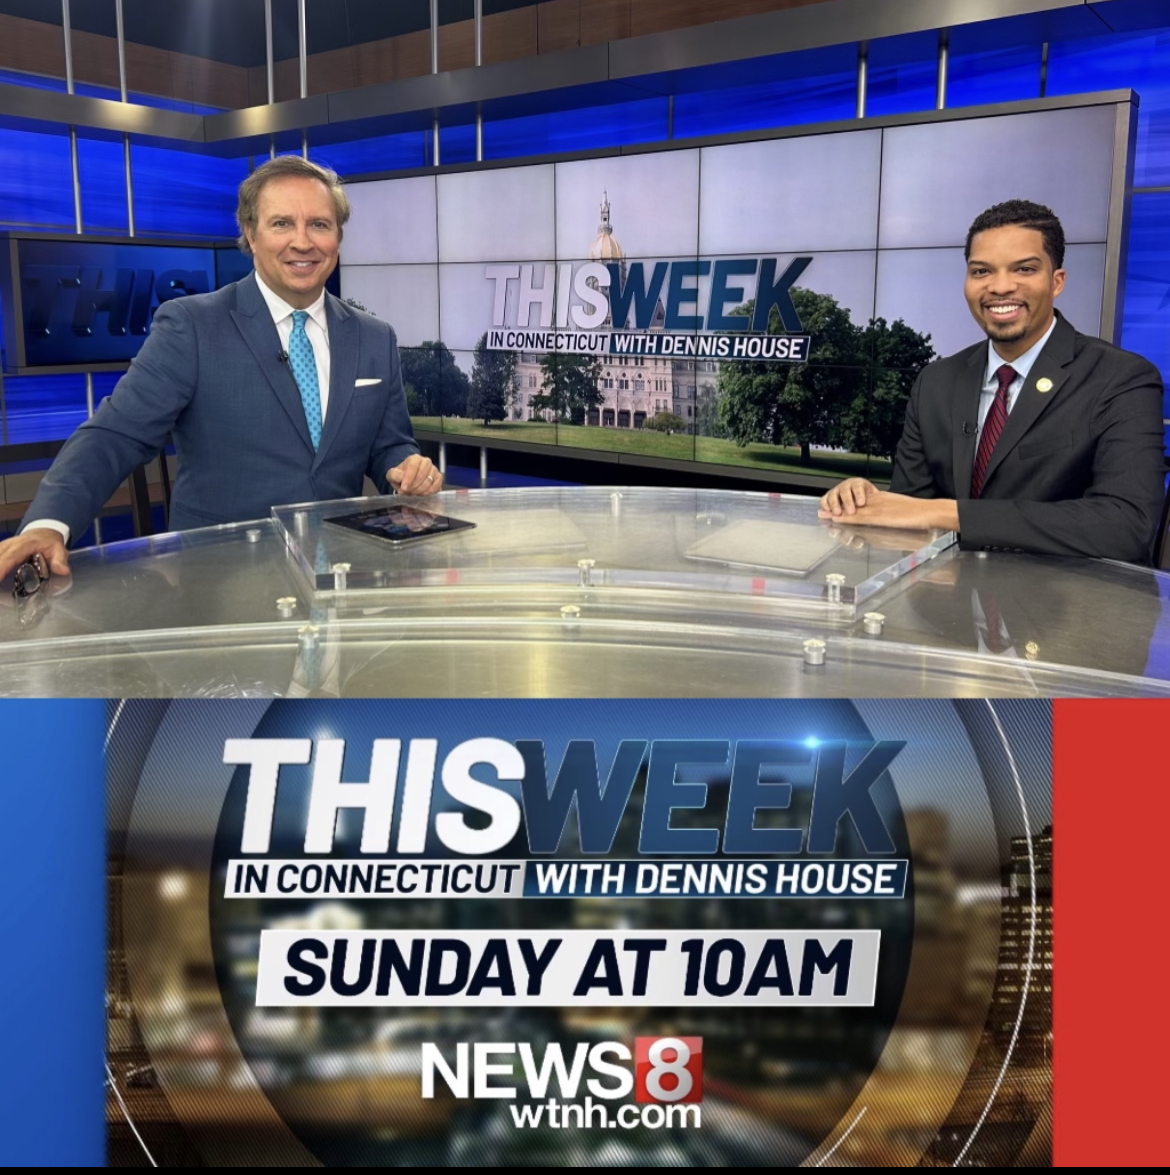 Catch This Week in Connecticut with Dennis House on Sunday morning. I'll be a guest on the show!